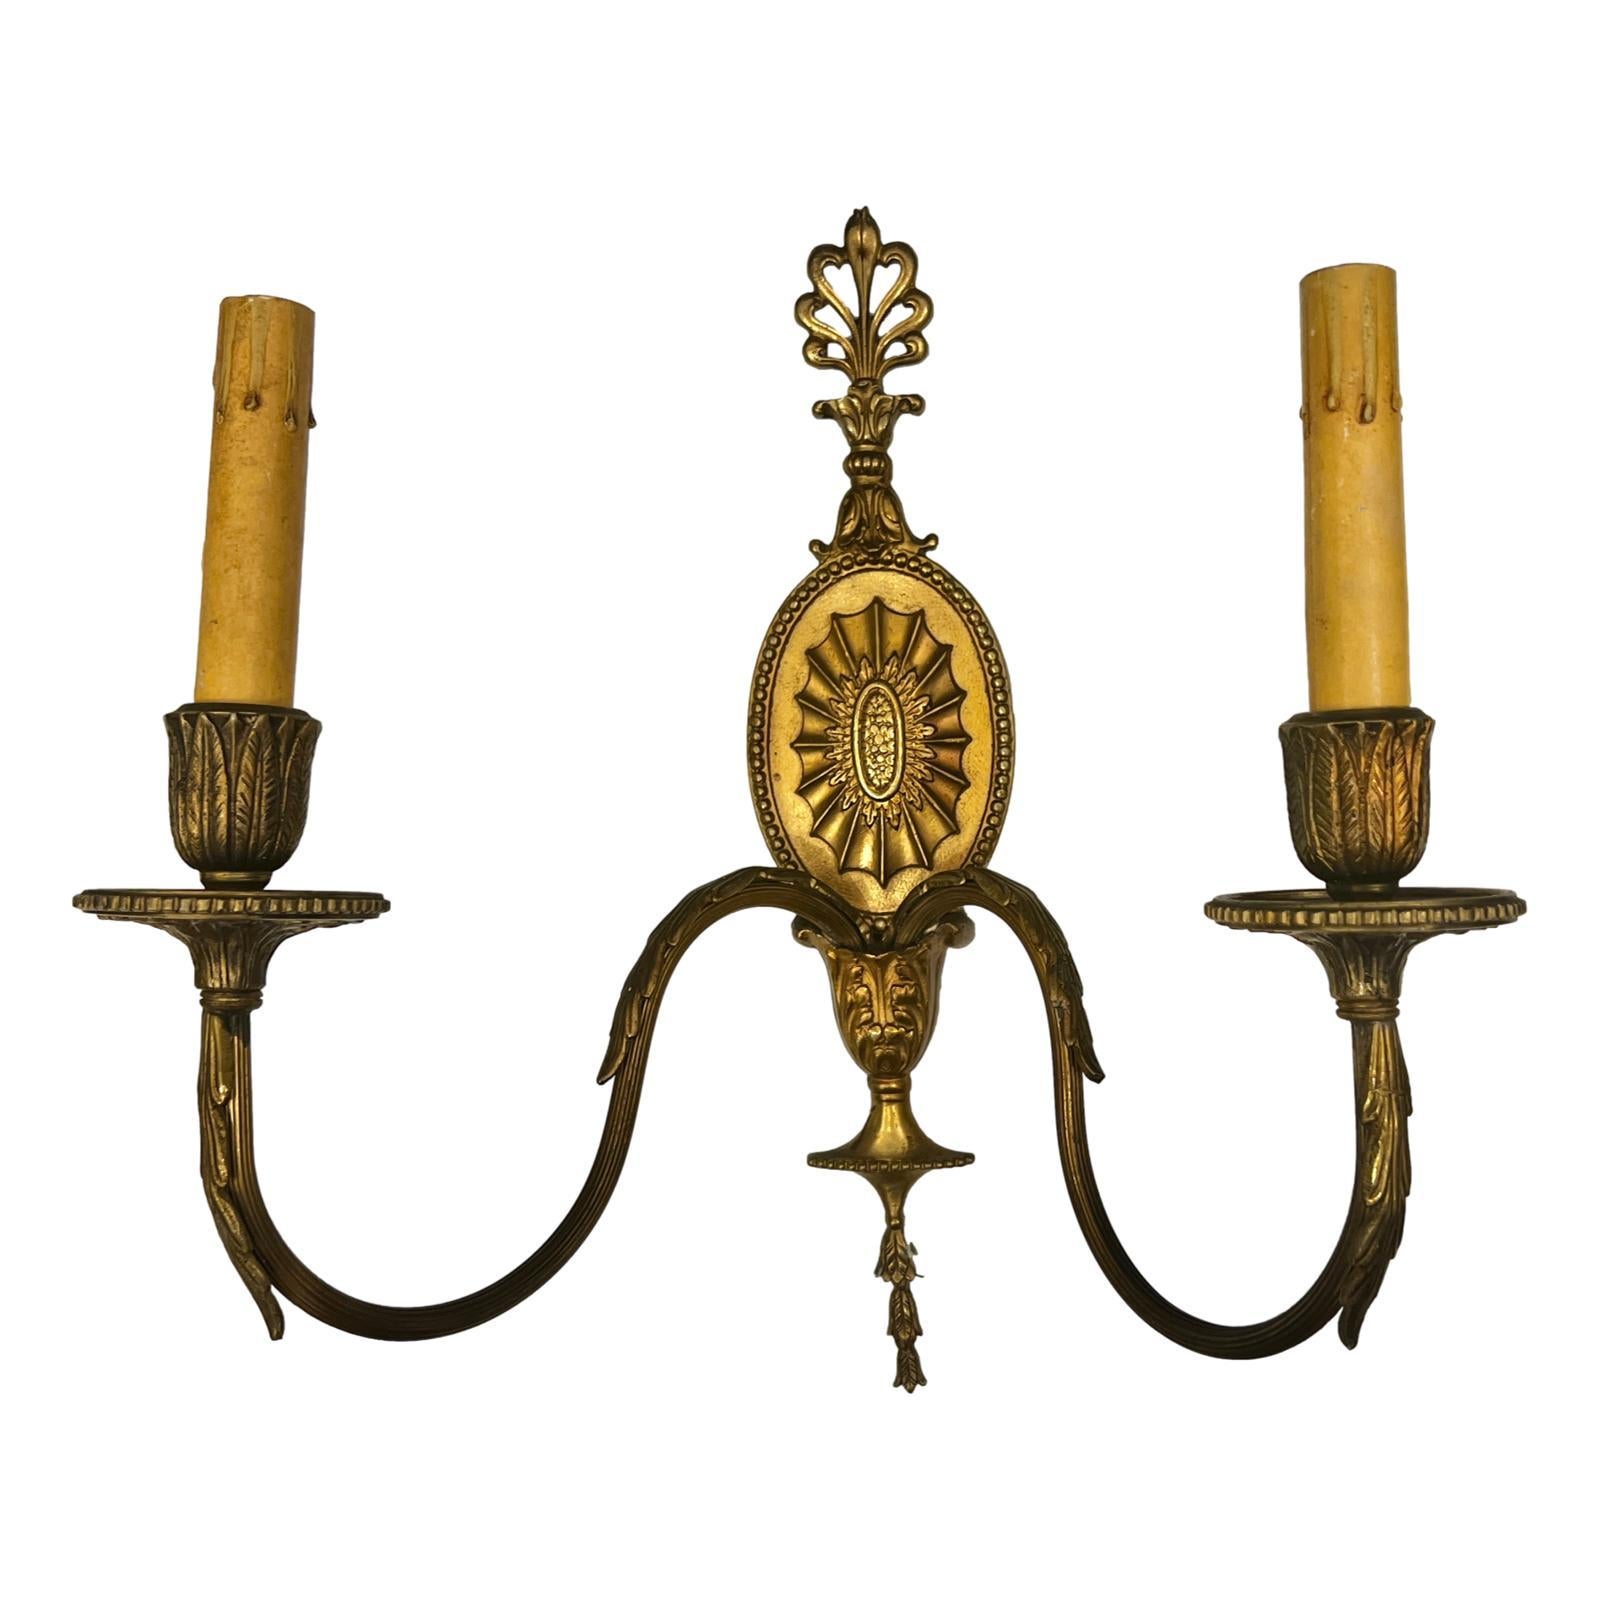 Pair of circa 1920's French neoclassic style two-arm sconces.

Measurements:
Height: 15